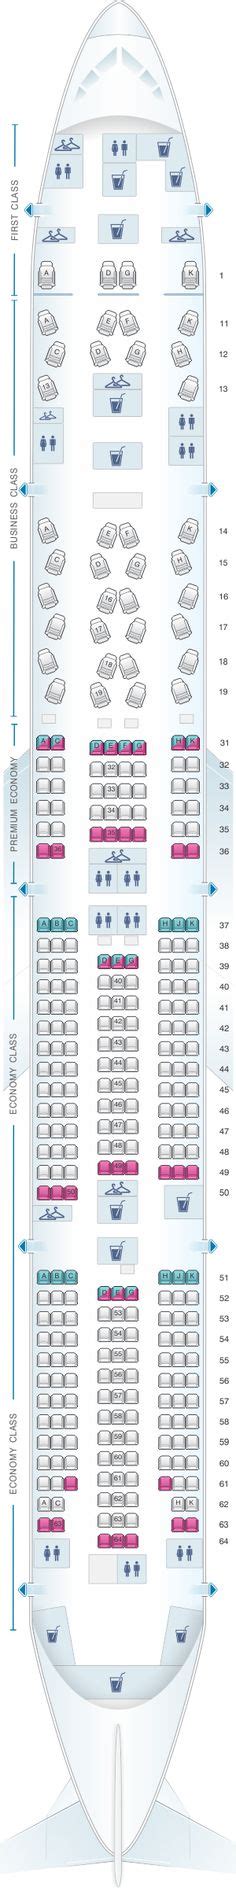 Seat Map China Southern Airlines Boeing B777b China Southern Airlines